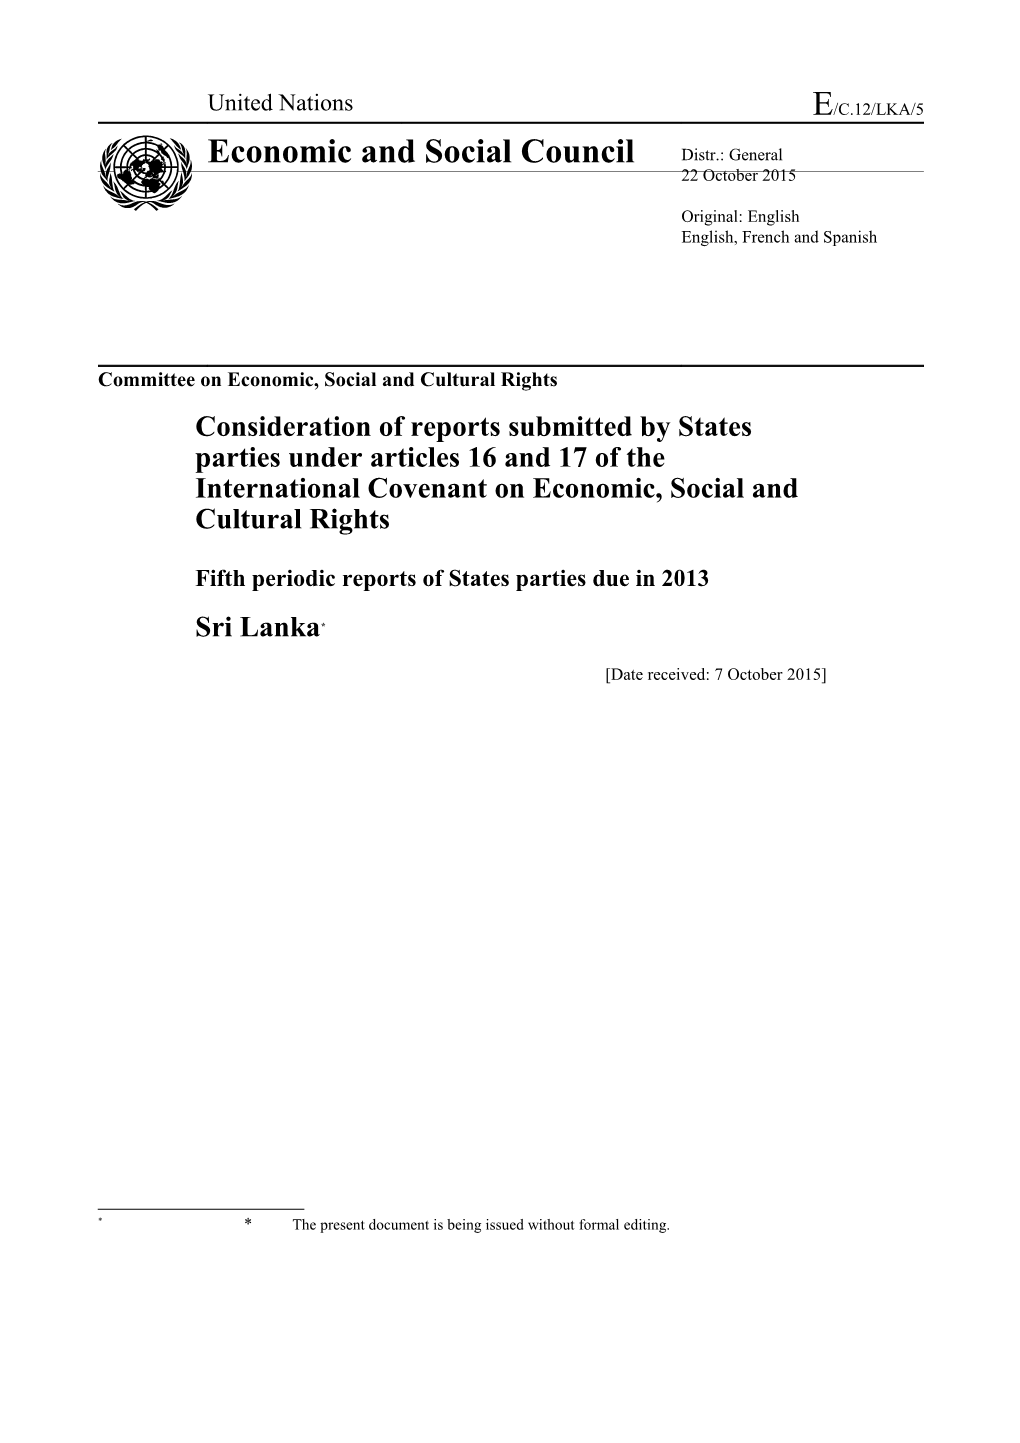 Committee on Economic, Social and Cultural Rights s1